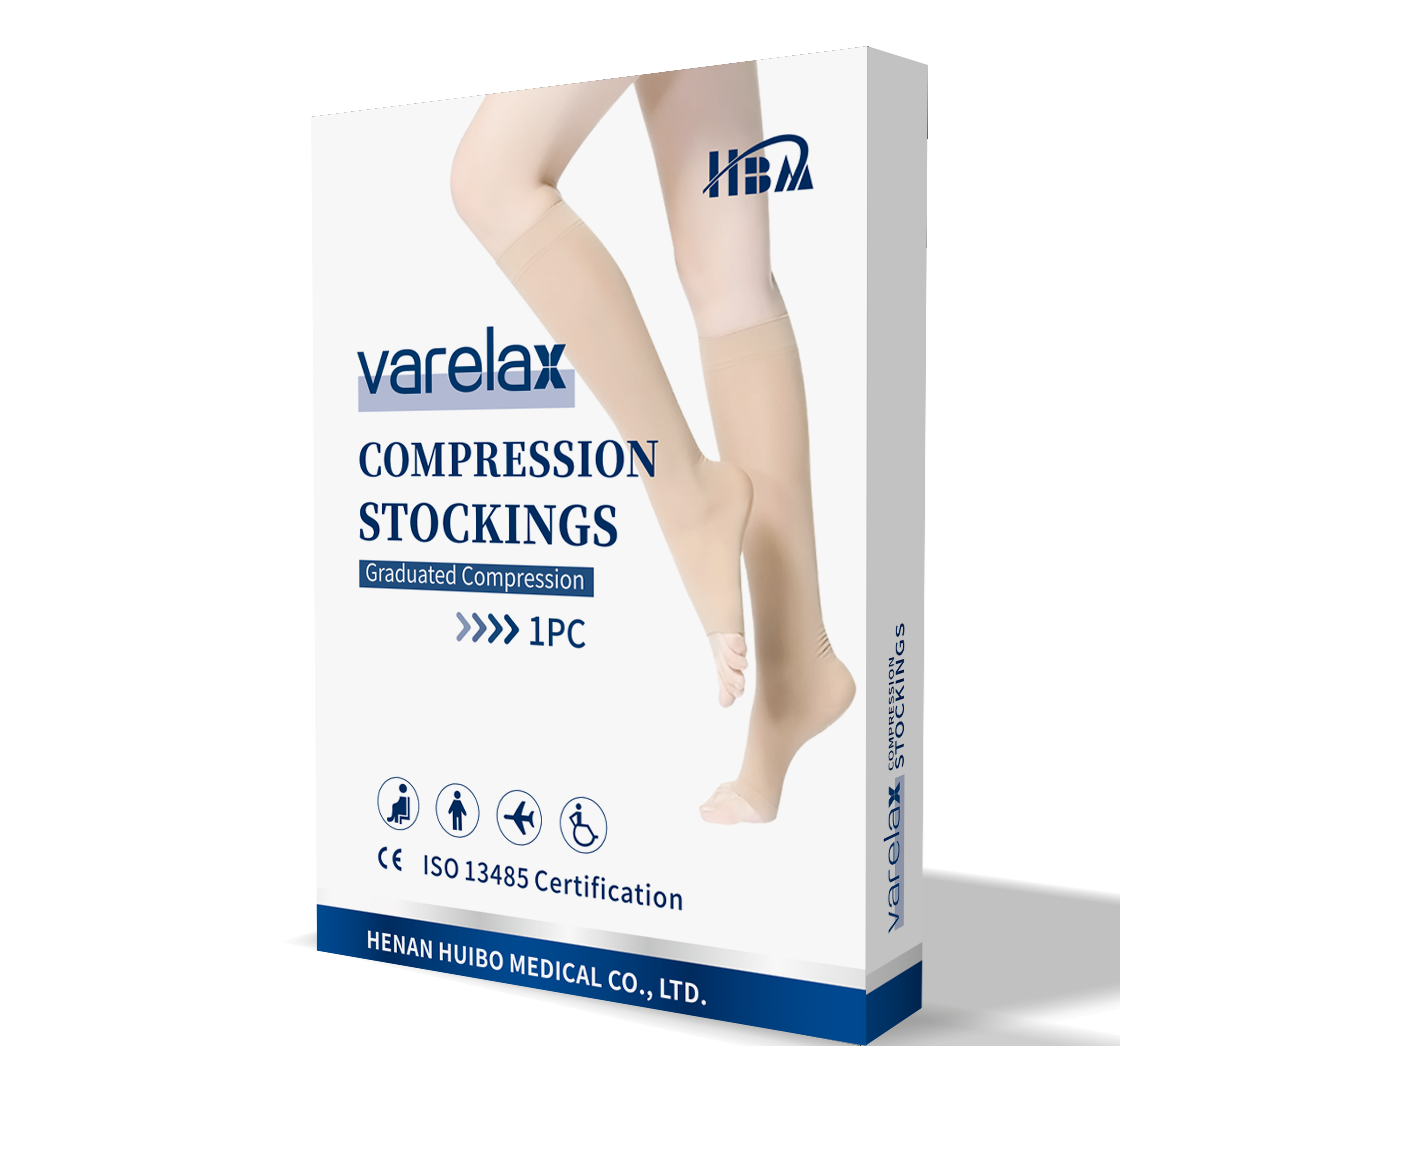 Elastic graduated compression stockings: what are they?